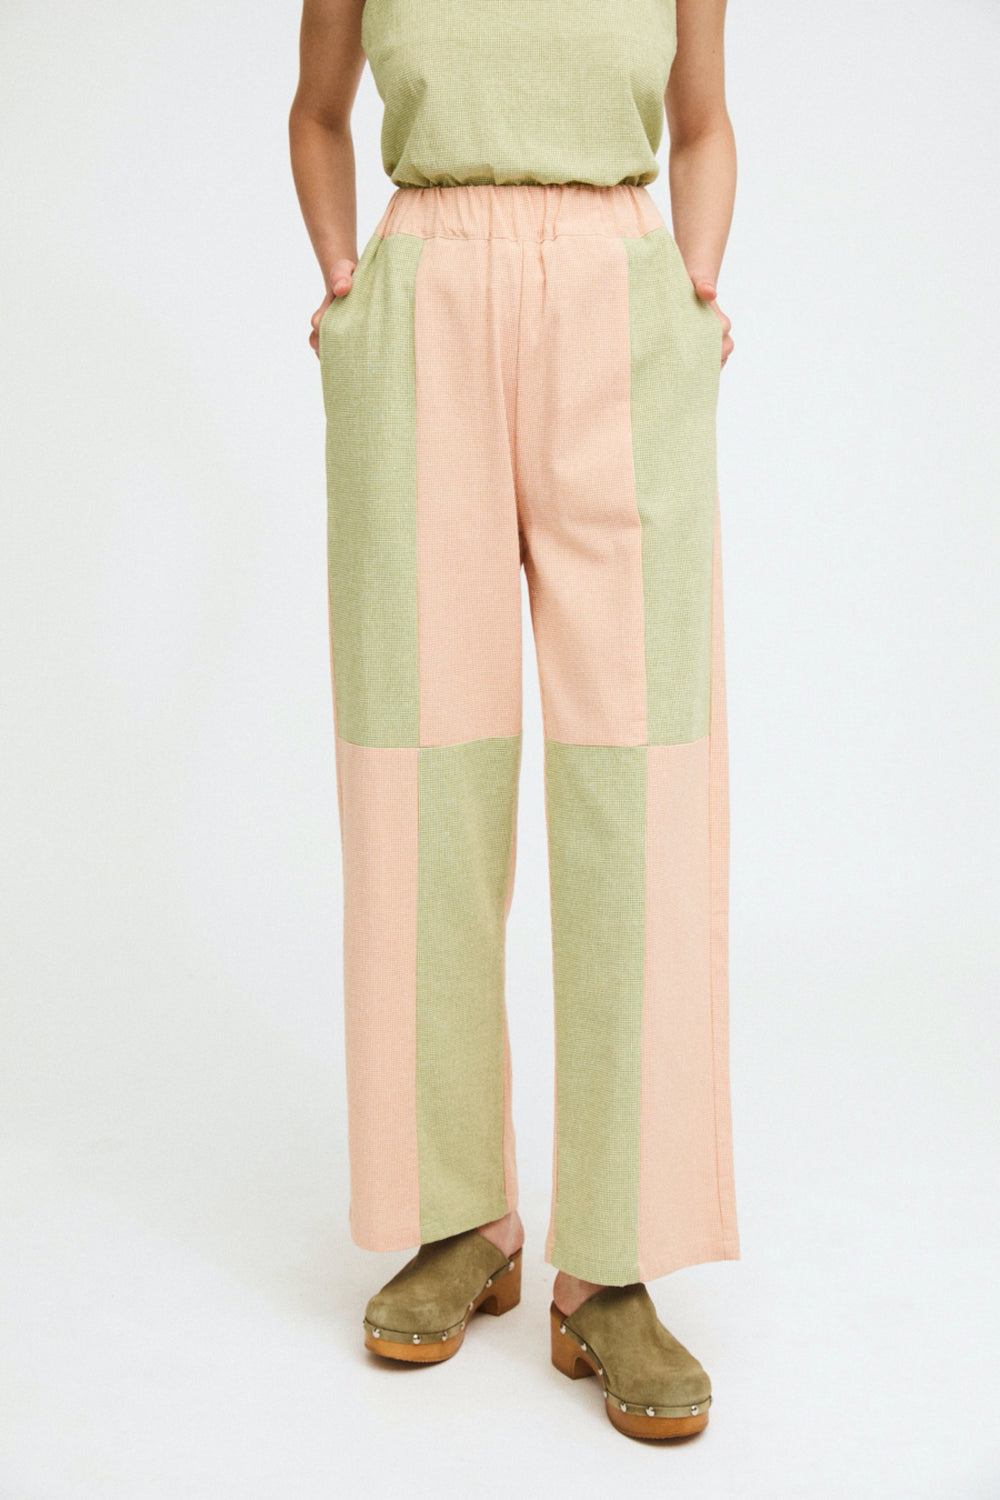 Patchwork Marianne Pant